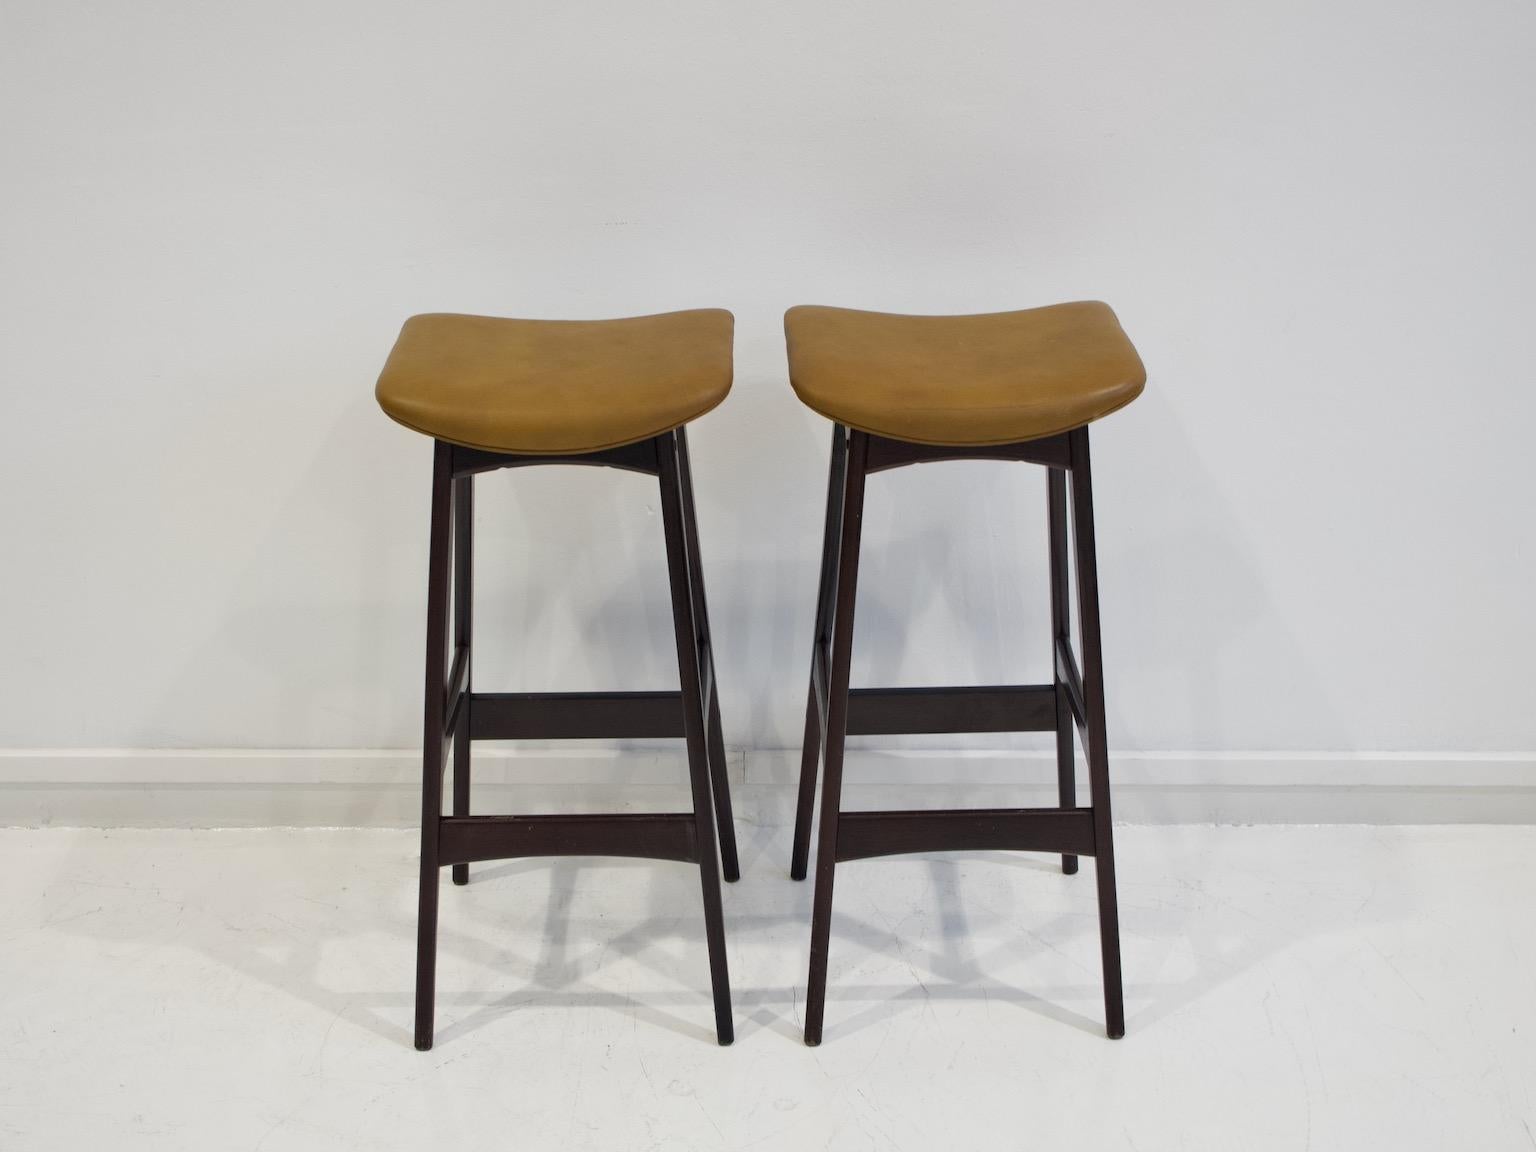 Two bar or kitchen stools with mahogany-covered beech frame, design attributed to Johannes Andersen. Seats upholstered in brown faux leather. Produced in Denmark, circa 1960s.